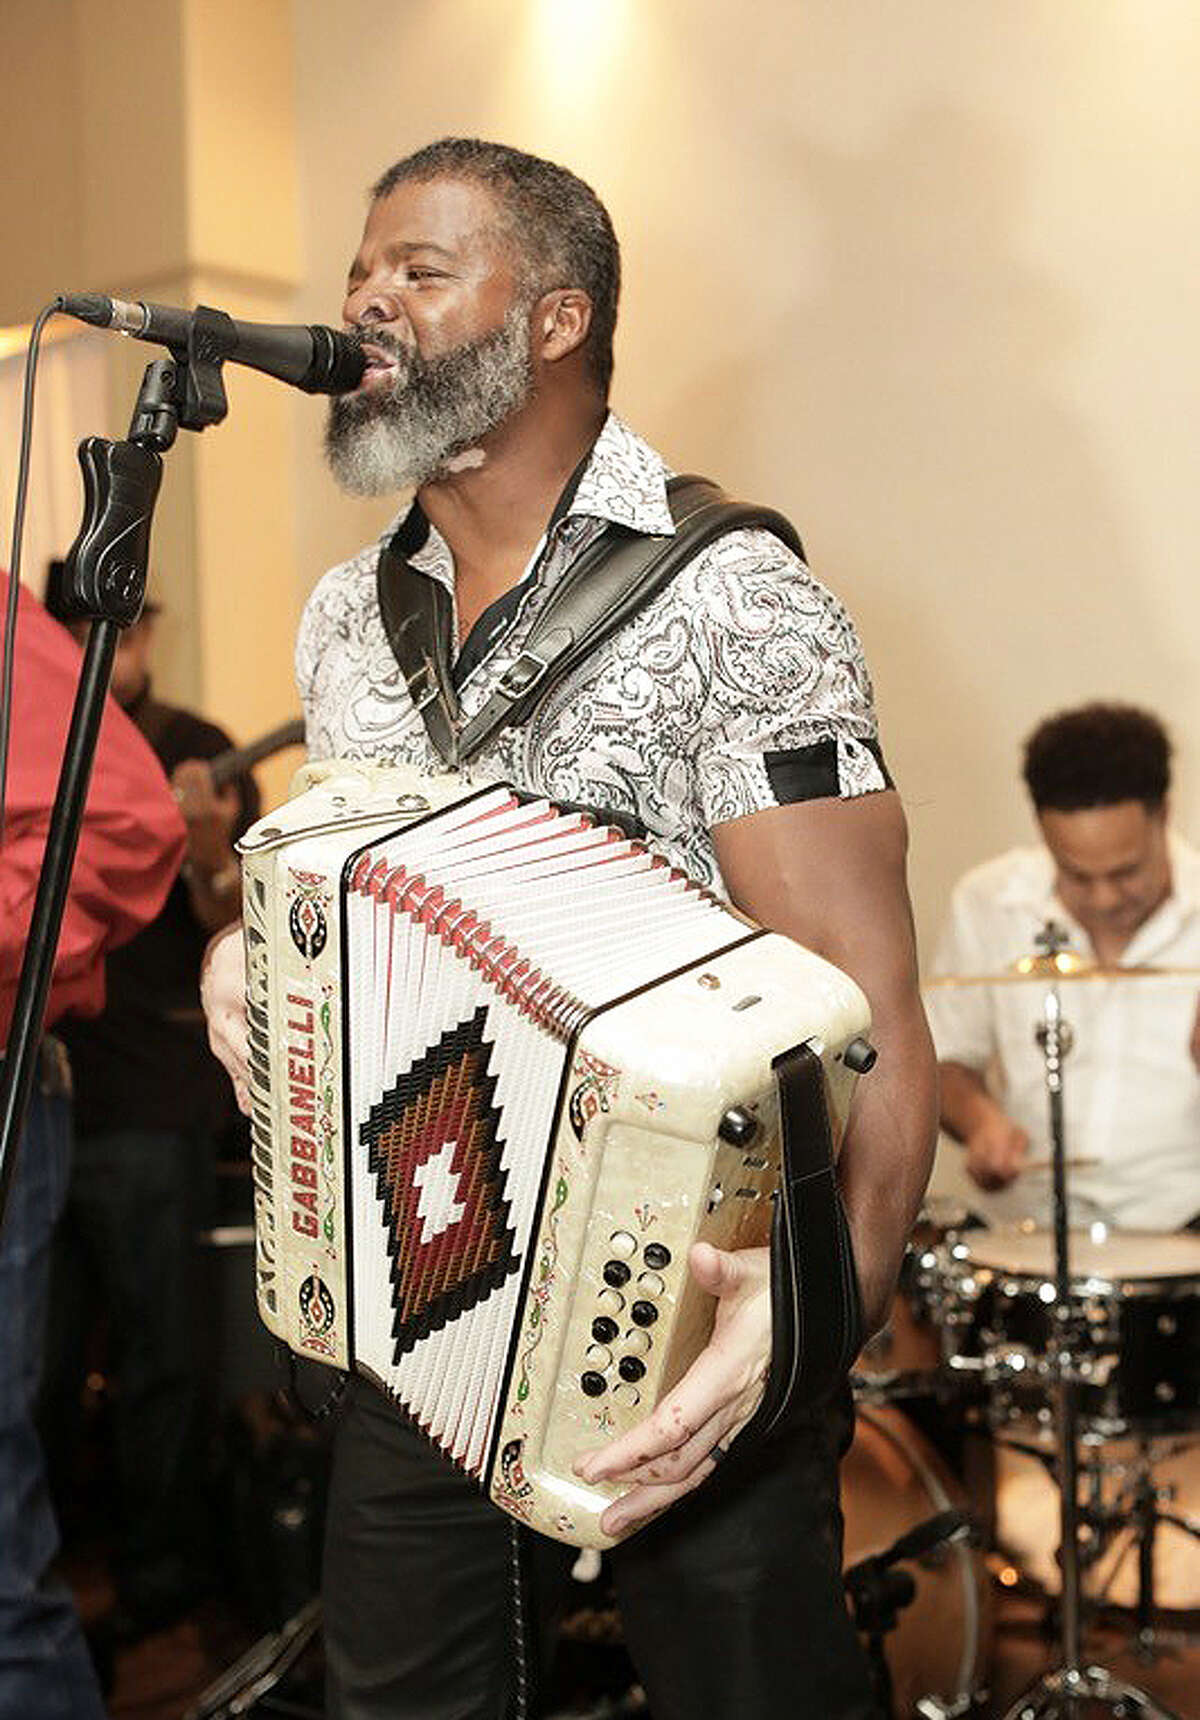 Zydeco music legend Step Rideau to perform at Crosby festival